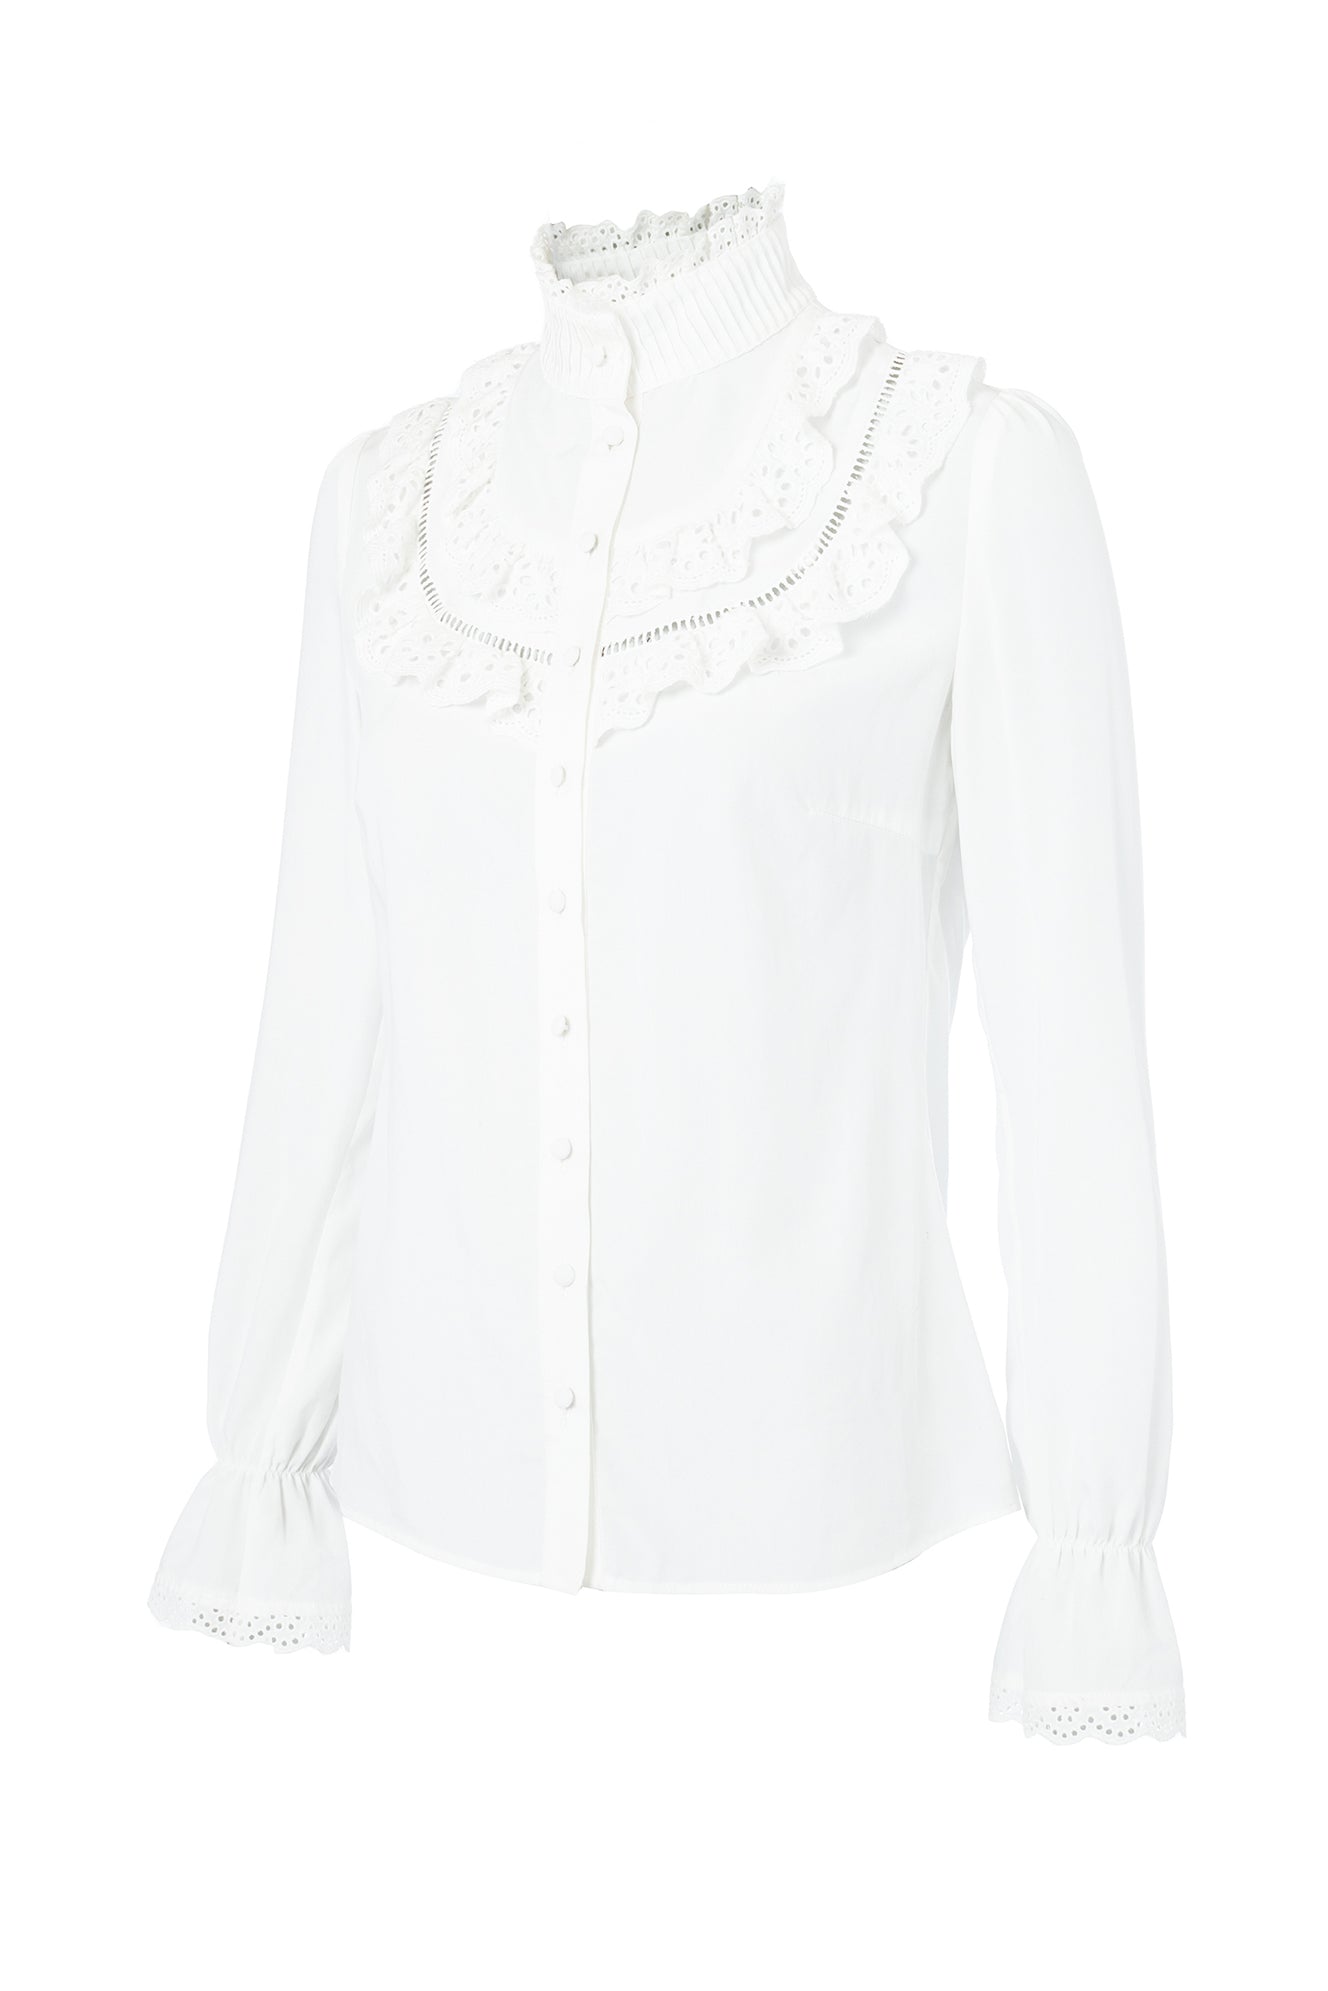 side image of white blouse with long sleeves and a slim fit with delicate lace trim to both the collar and cuff edges with flattering lace details to the front body